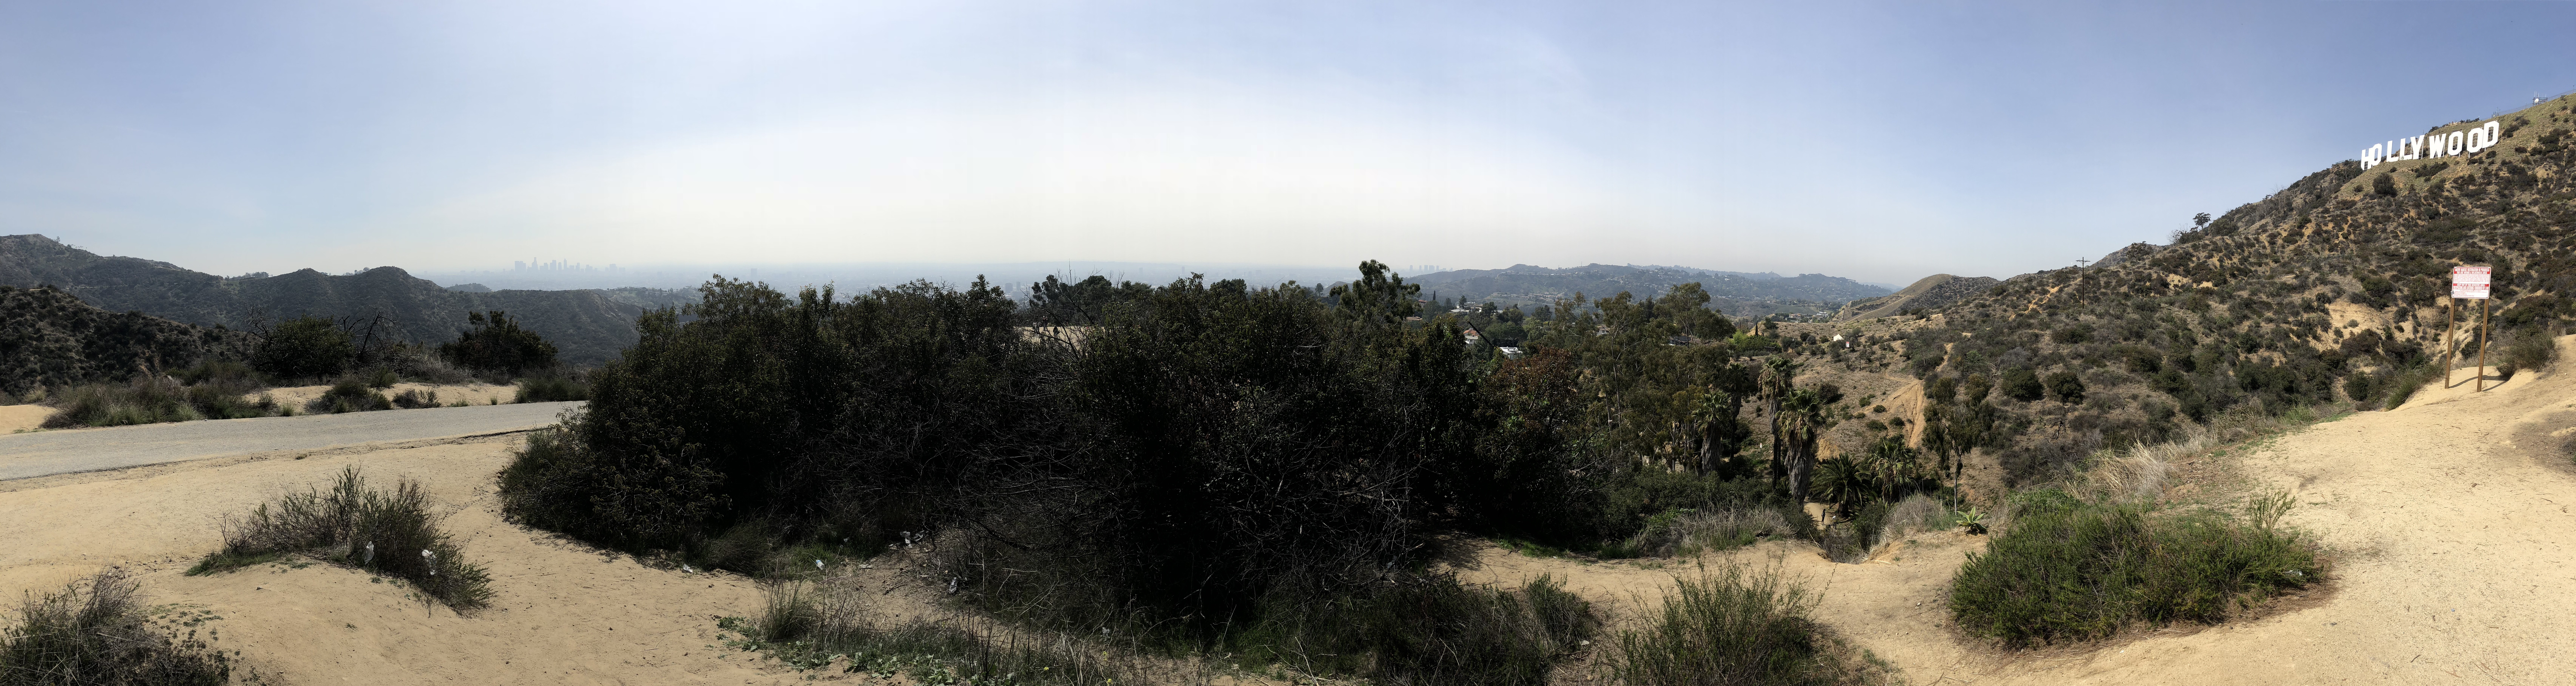 A view from the hike to the Hollywood Sign